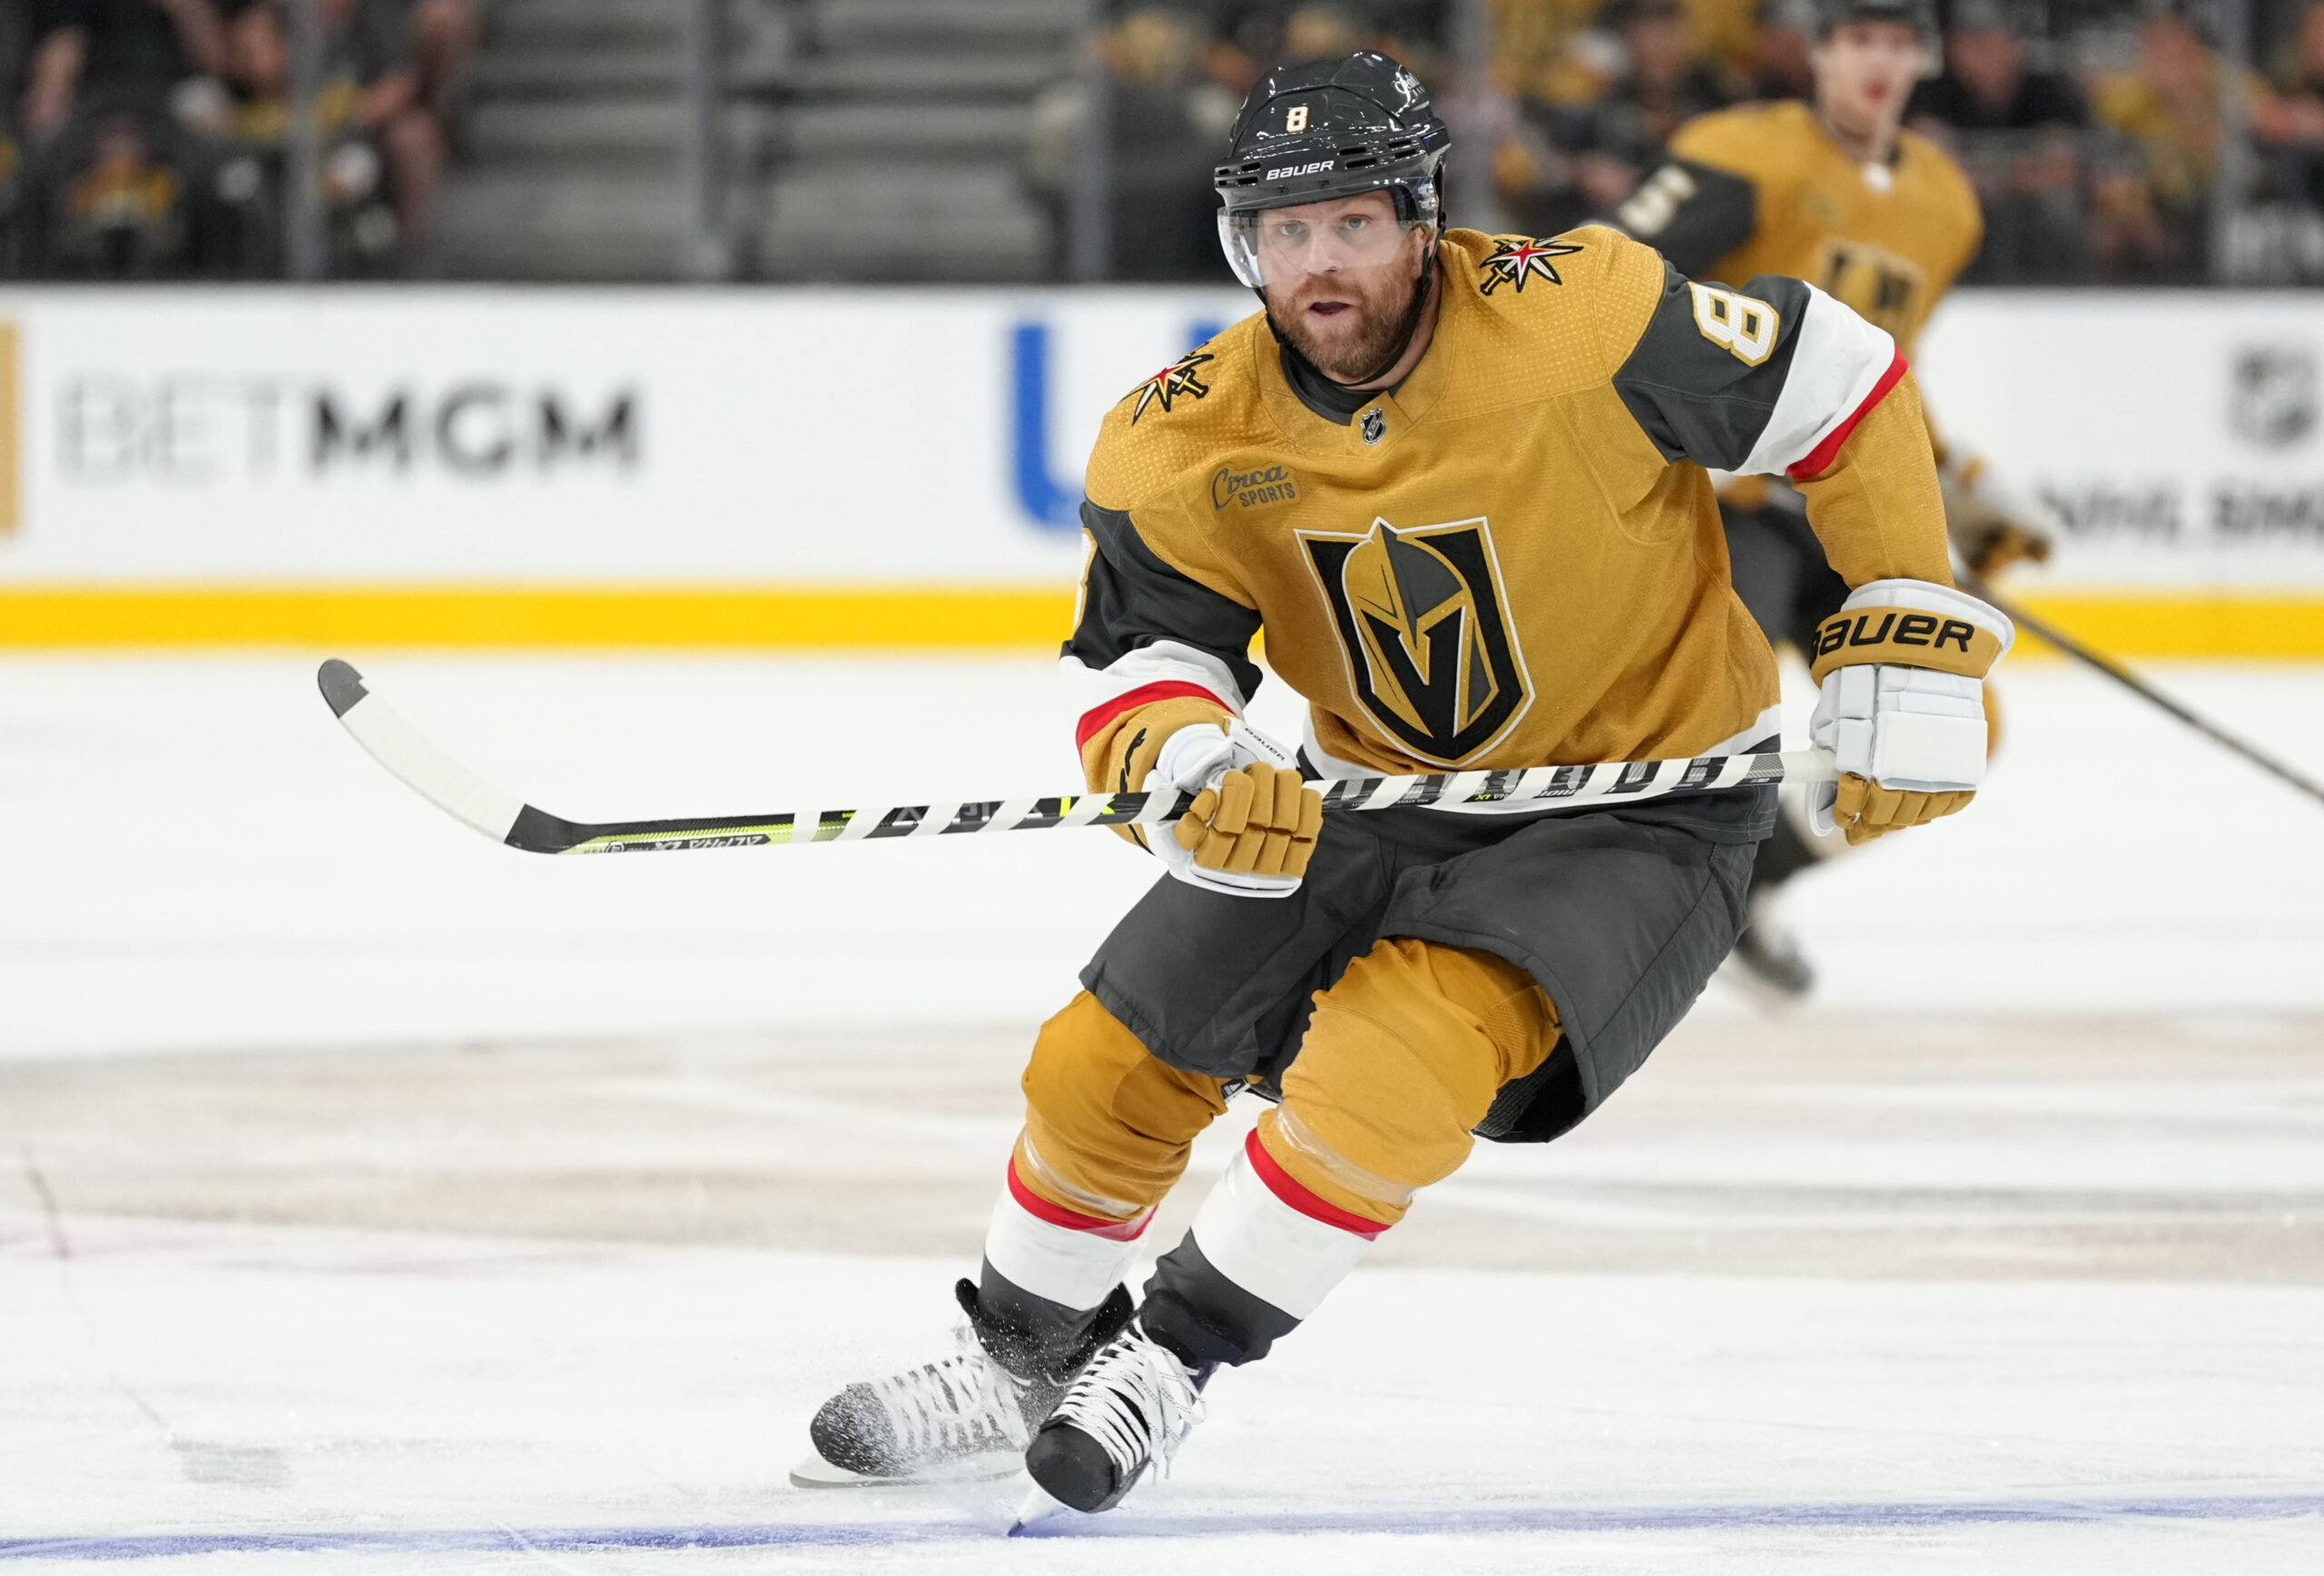 NHL star Phil Kessel psyched about joining 'good team that wants